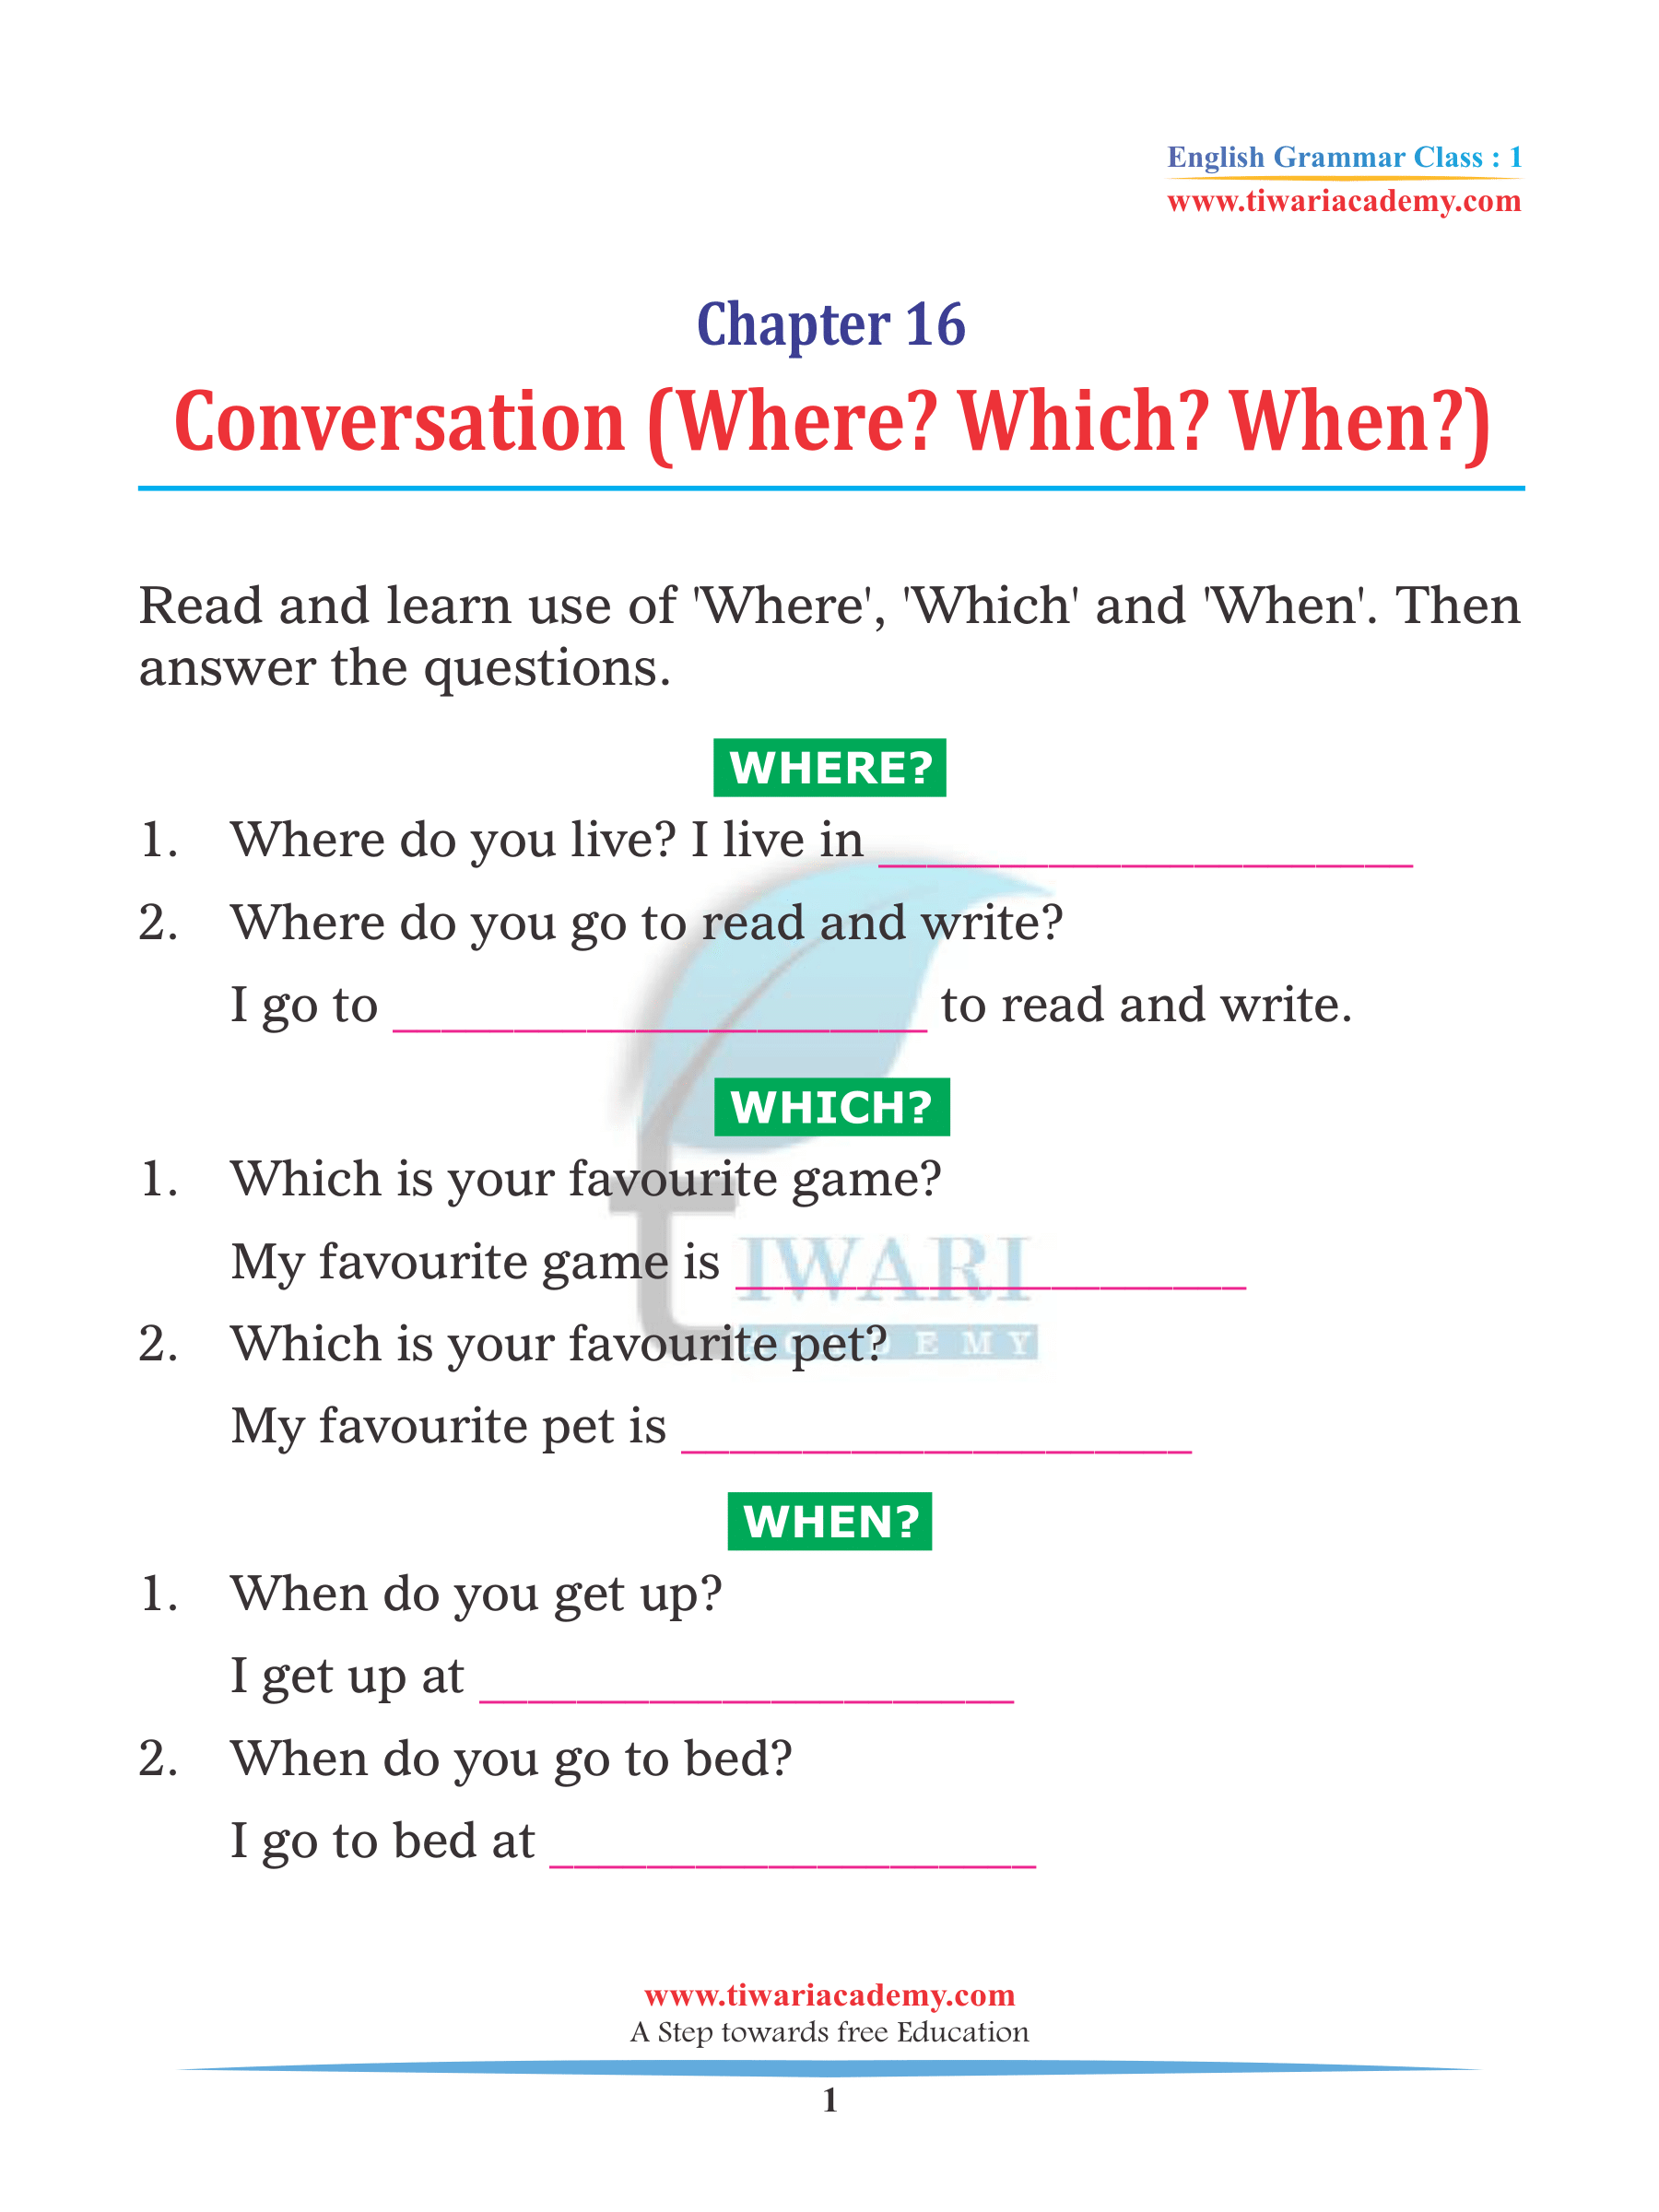 Conversation using Where, Which, and When for Class 1 English Grammar